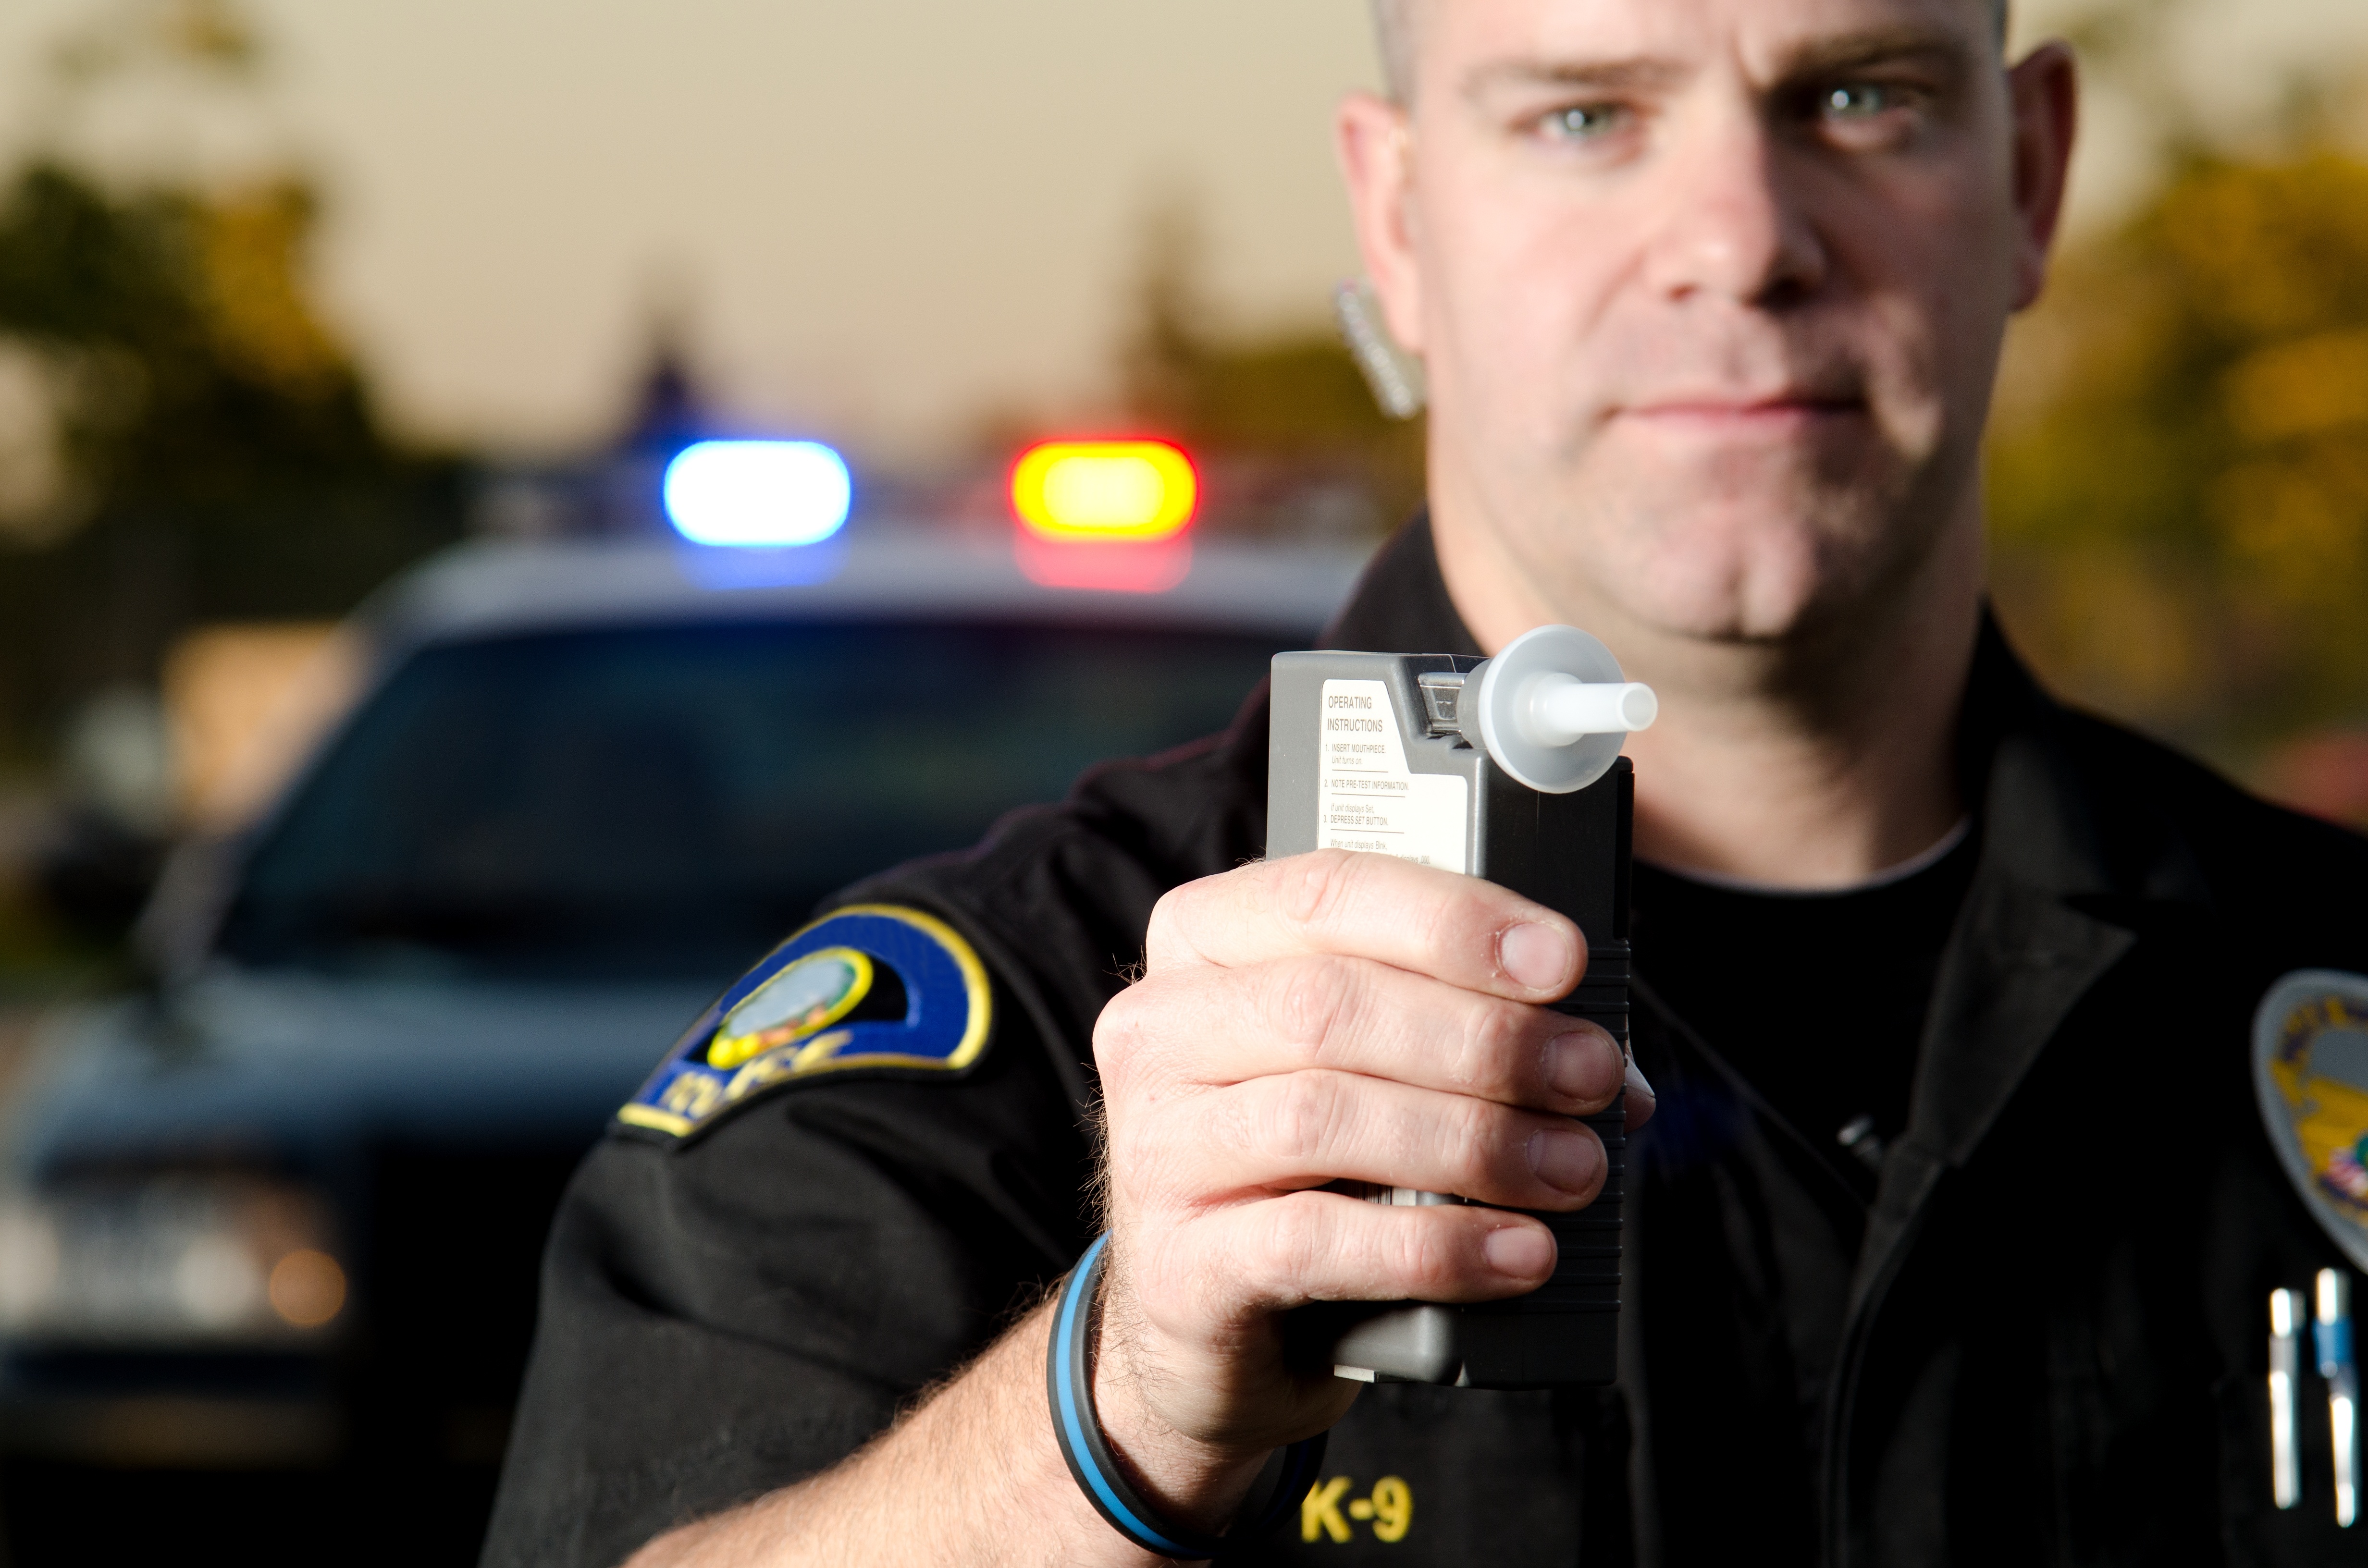 A police officer pulling someone over for a holiday DUI charge - if you fnd yourself in this situation, call Branson West Law today for an expert DWI attorney in Utah.